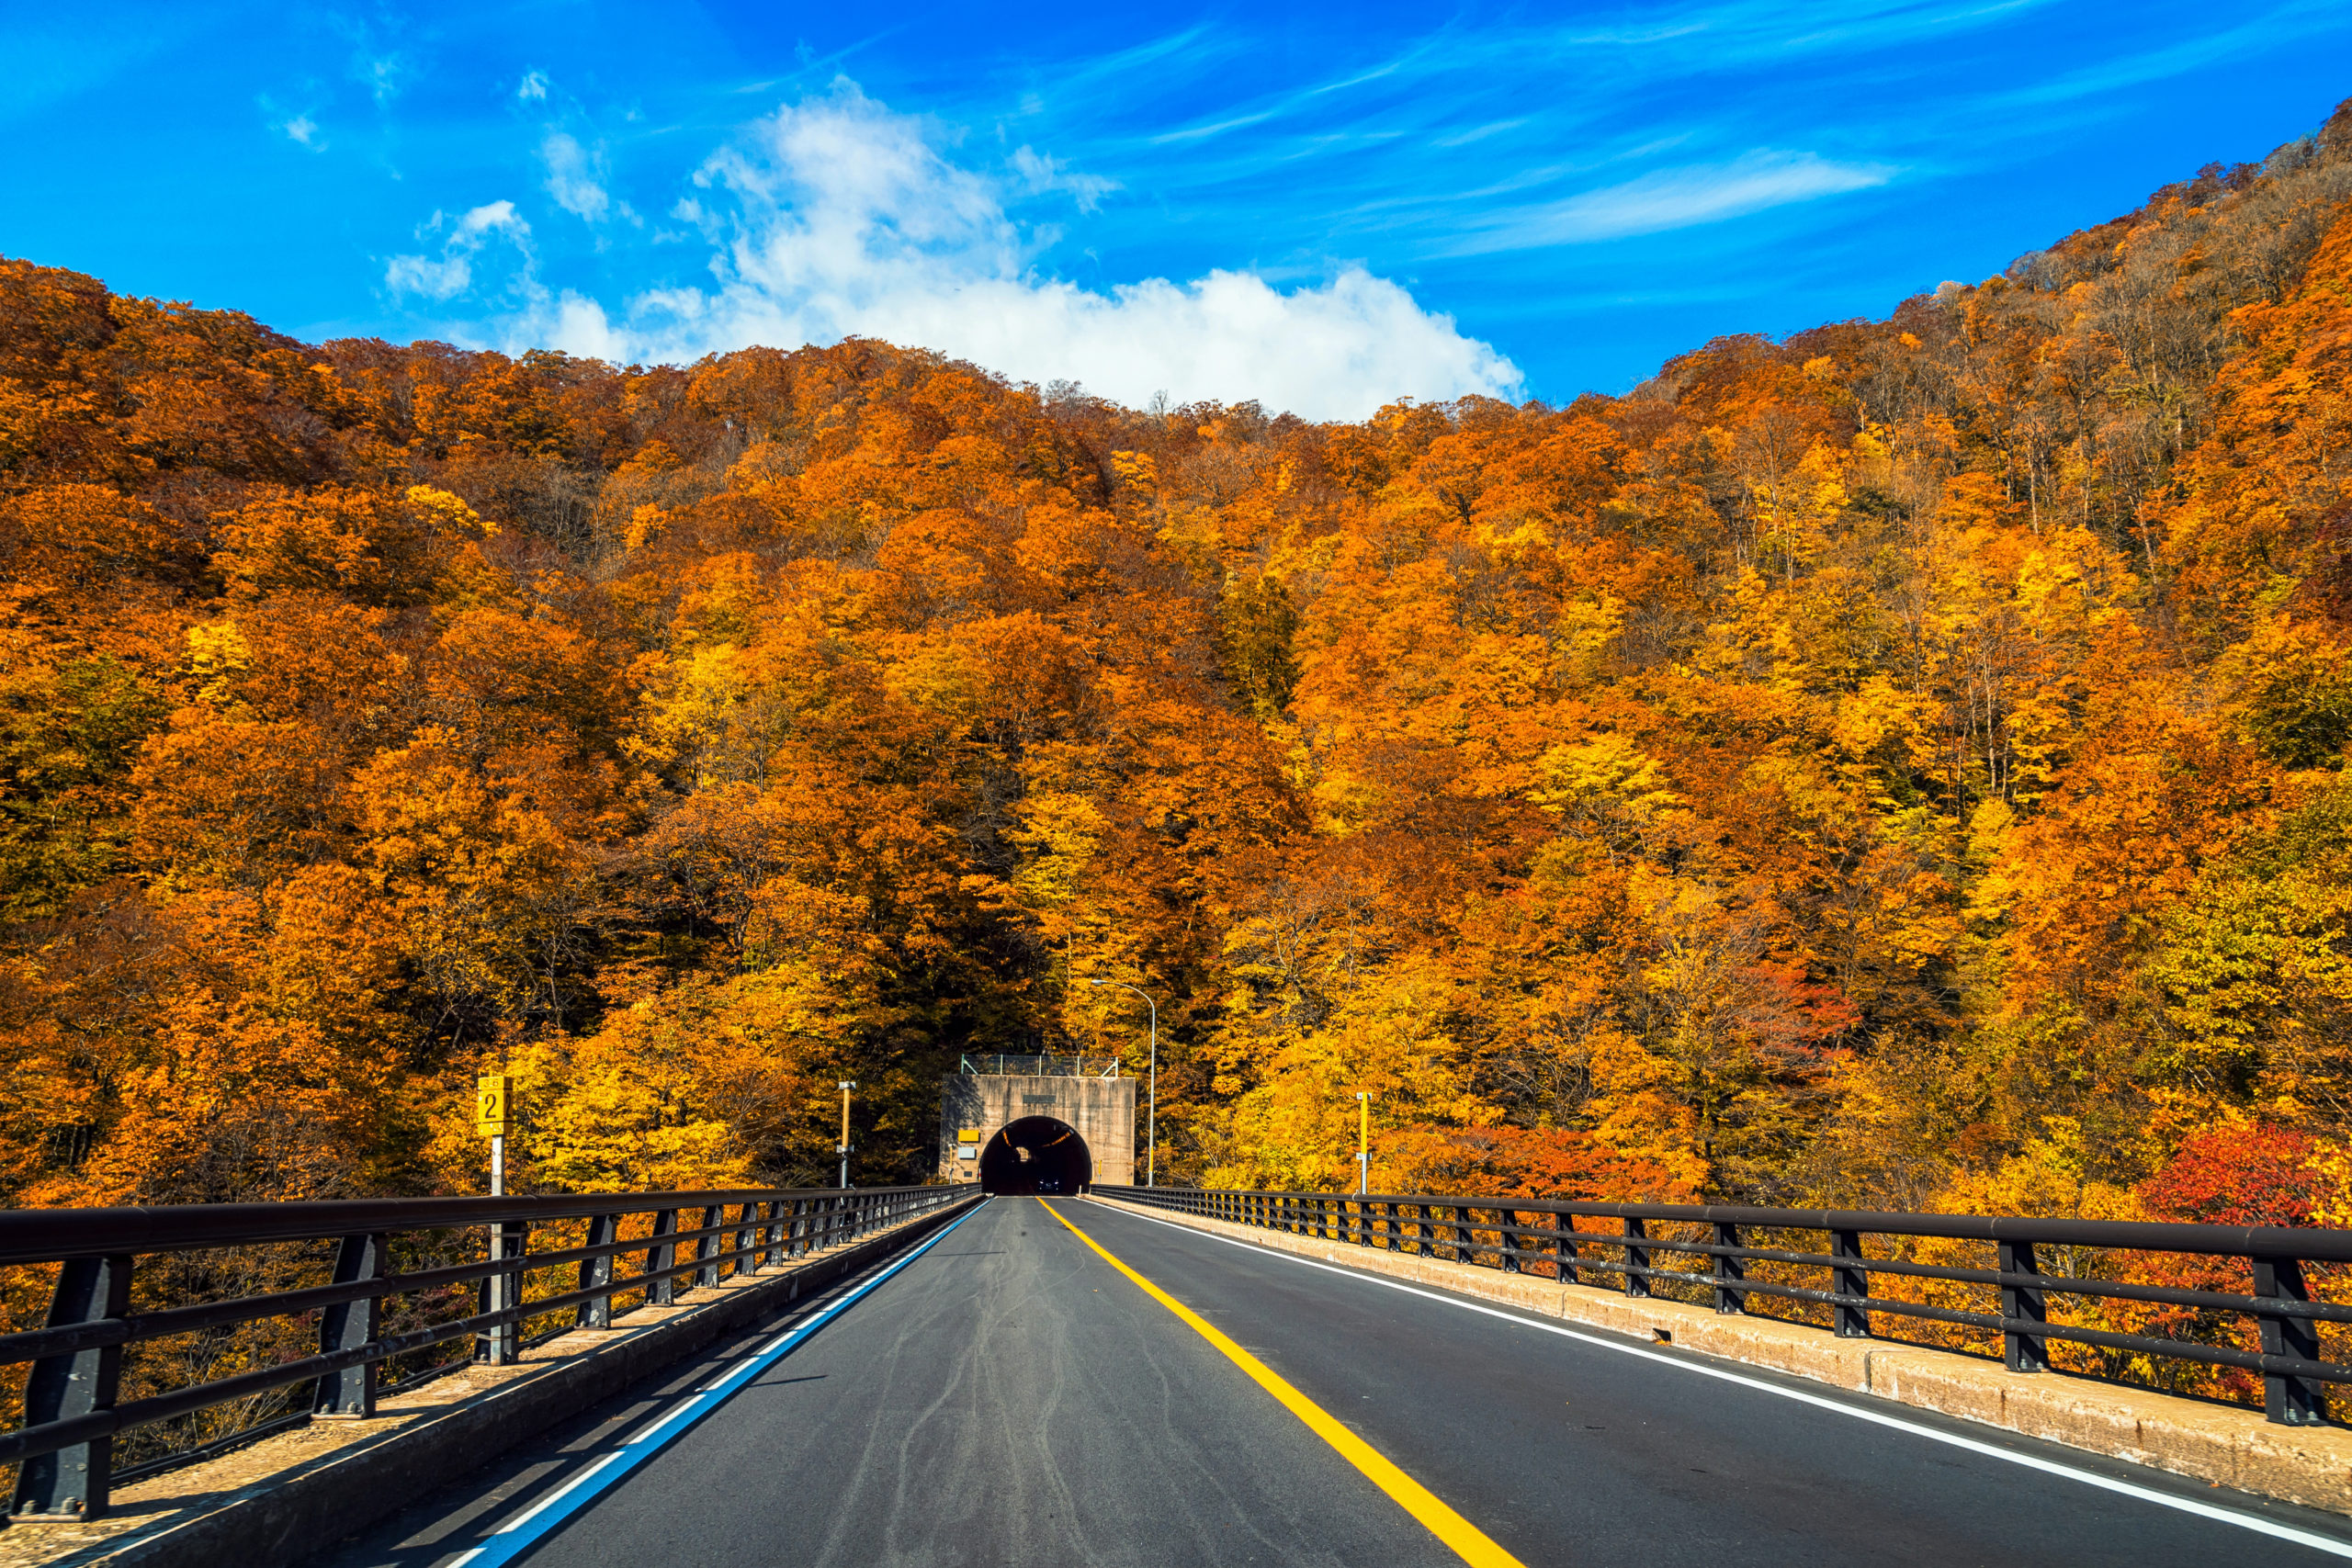 Landscape scene of Autumn season with car tunnel on the road in tohoku, japan, landscape and transportation concept